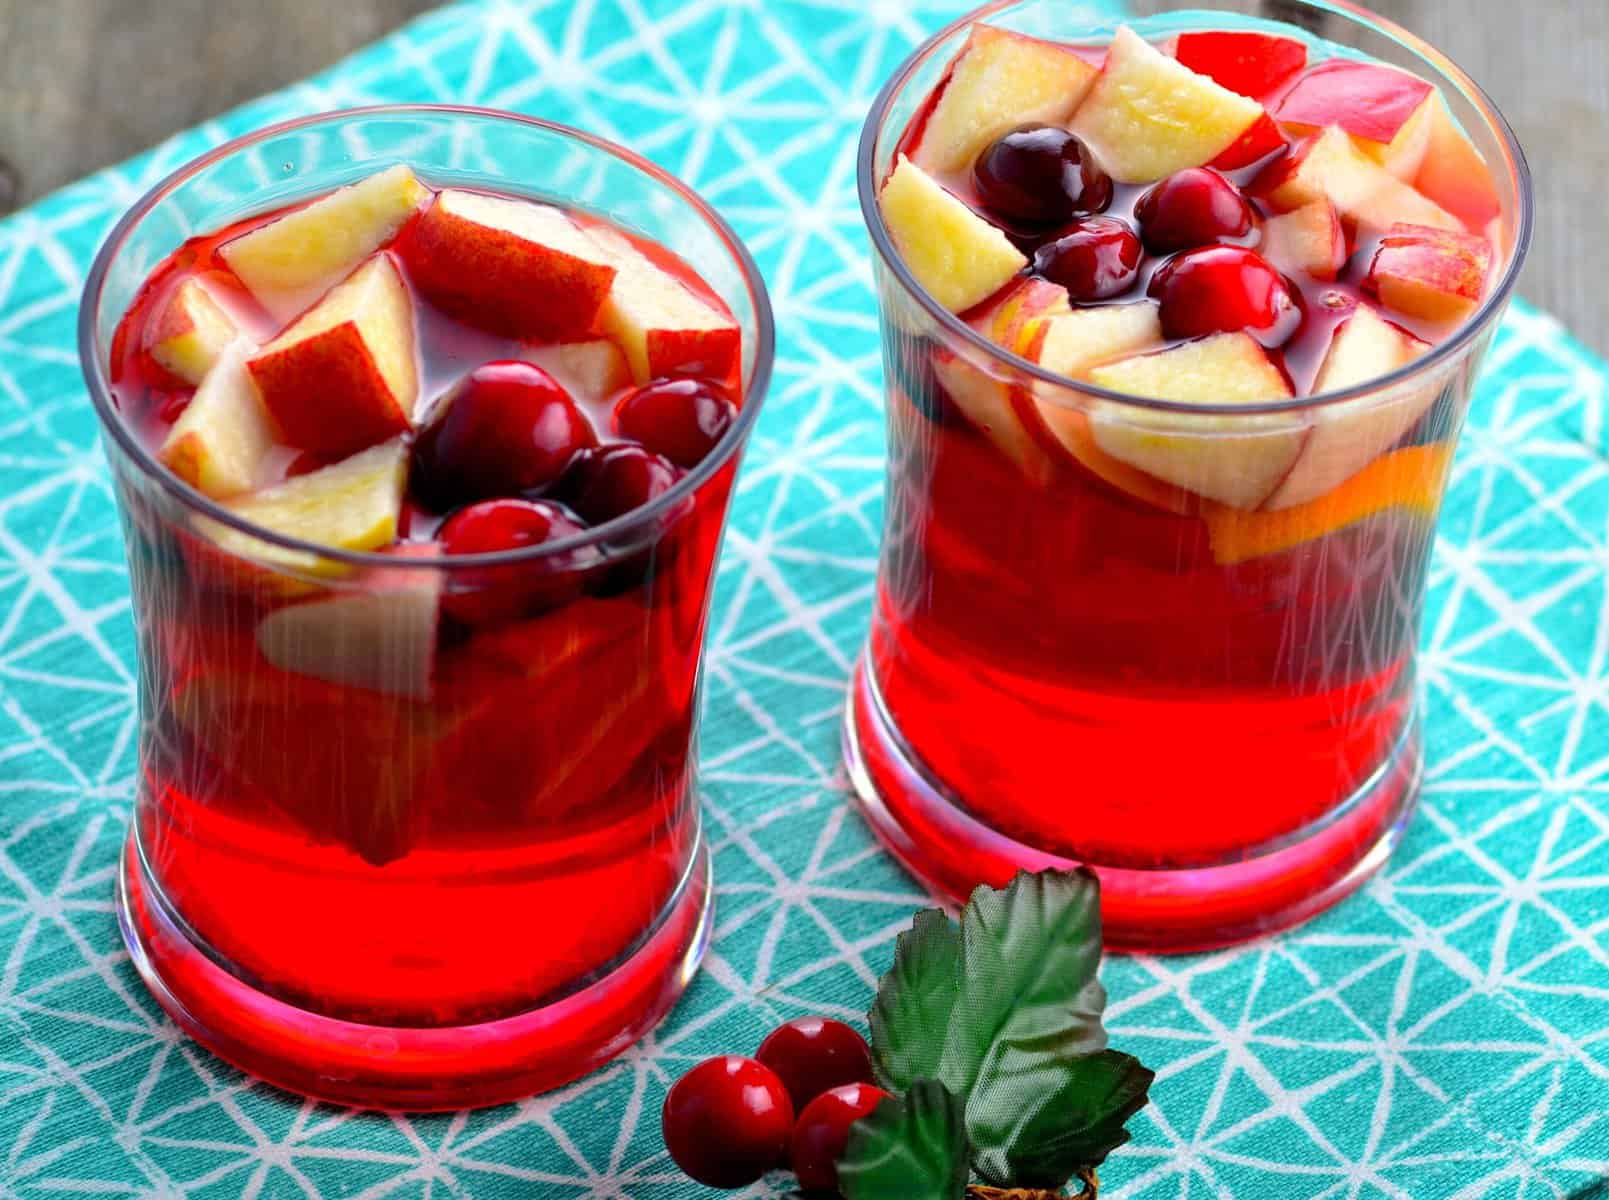  This bright and beautiful drink is perfect for any holiday gathering.